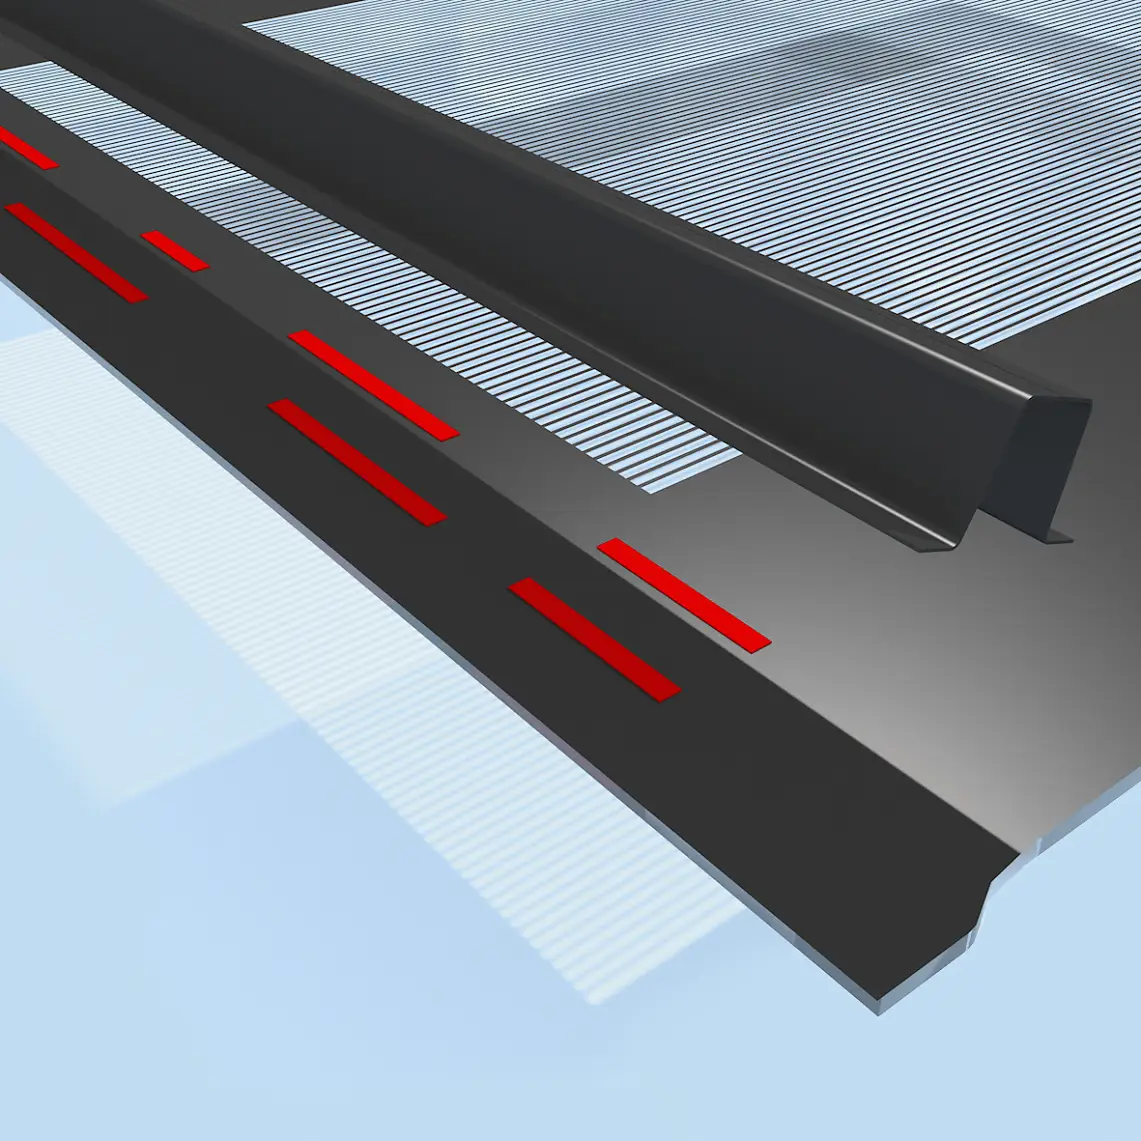 A metal construction is fixed by using double-sided tape.